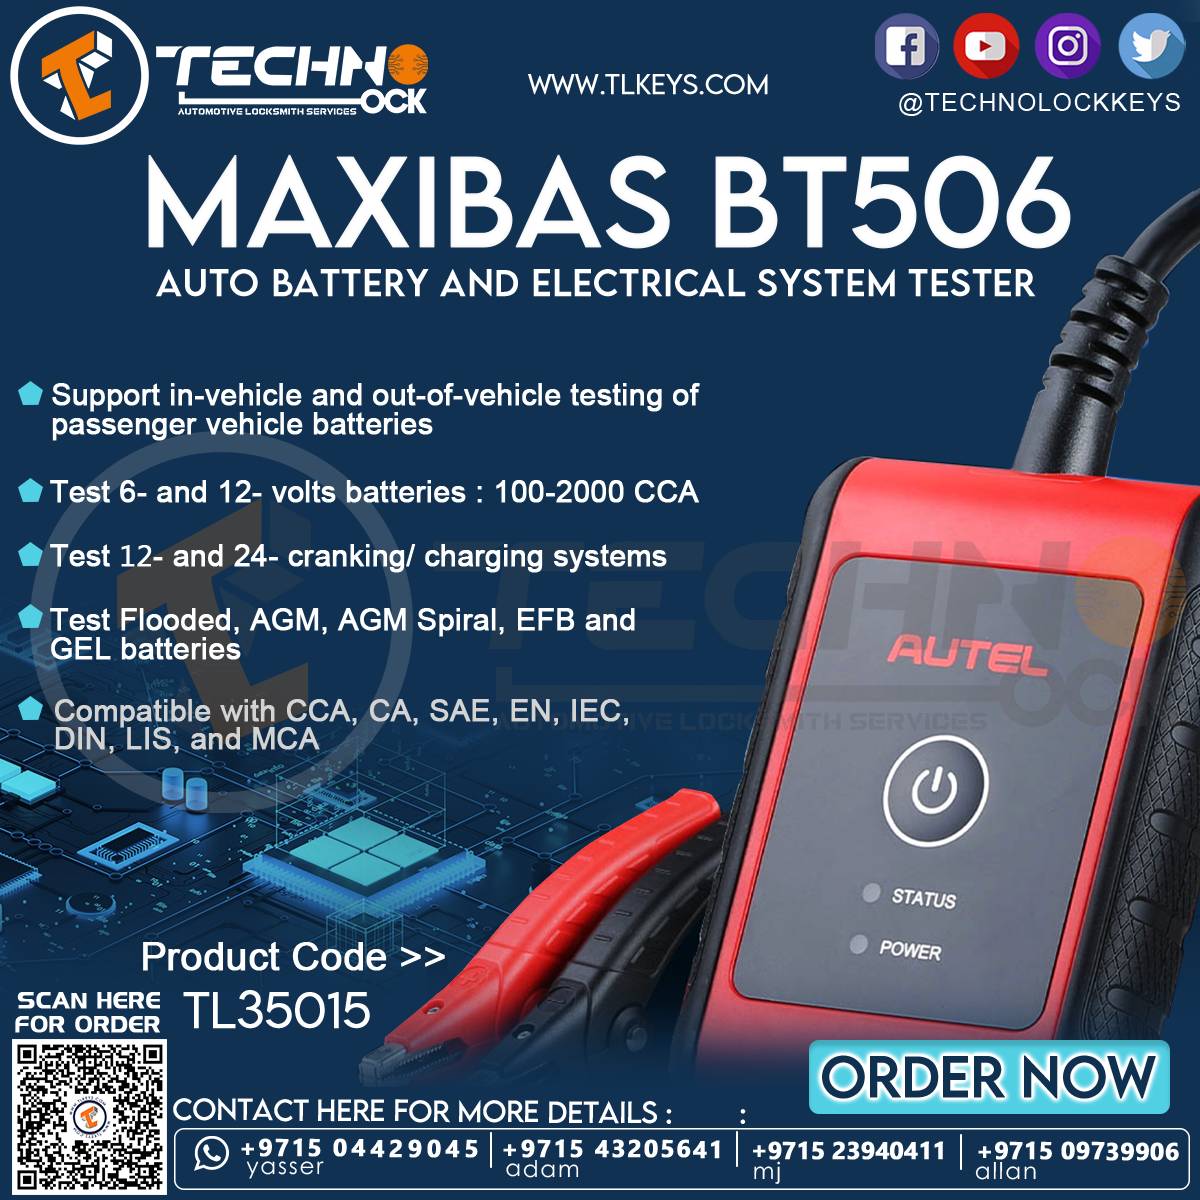 BT506 is a complete charging and starting system test